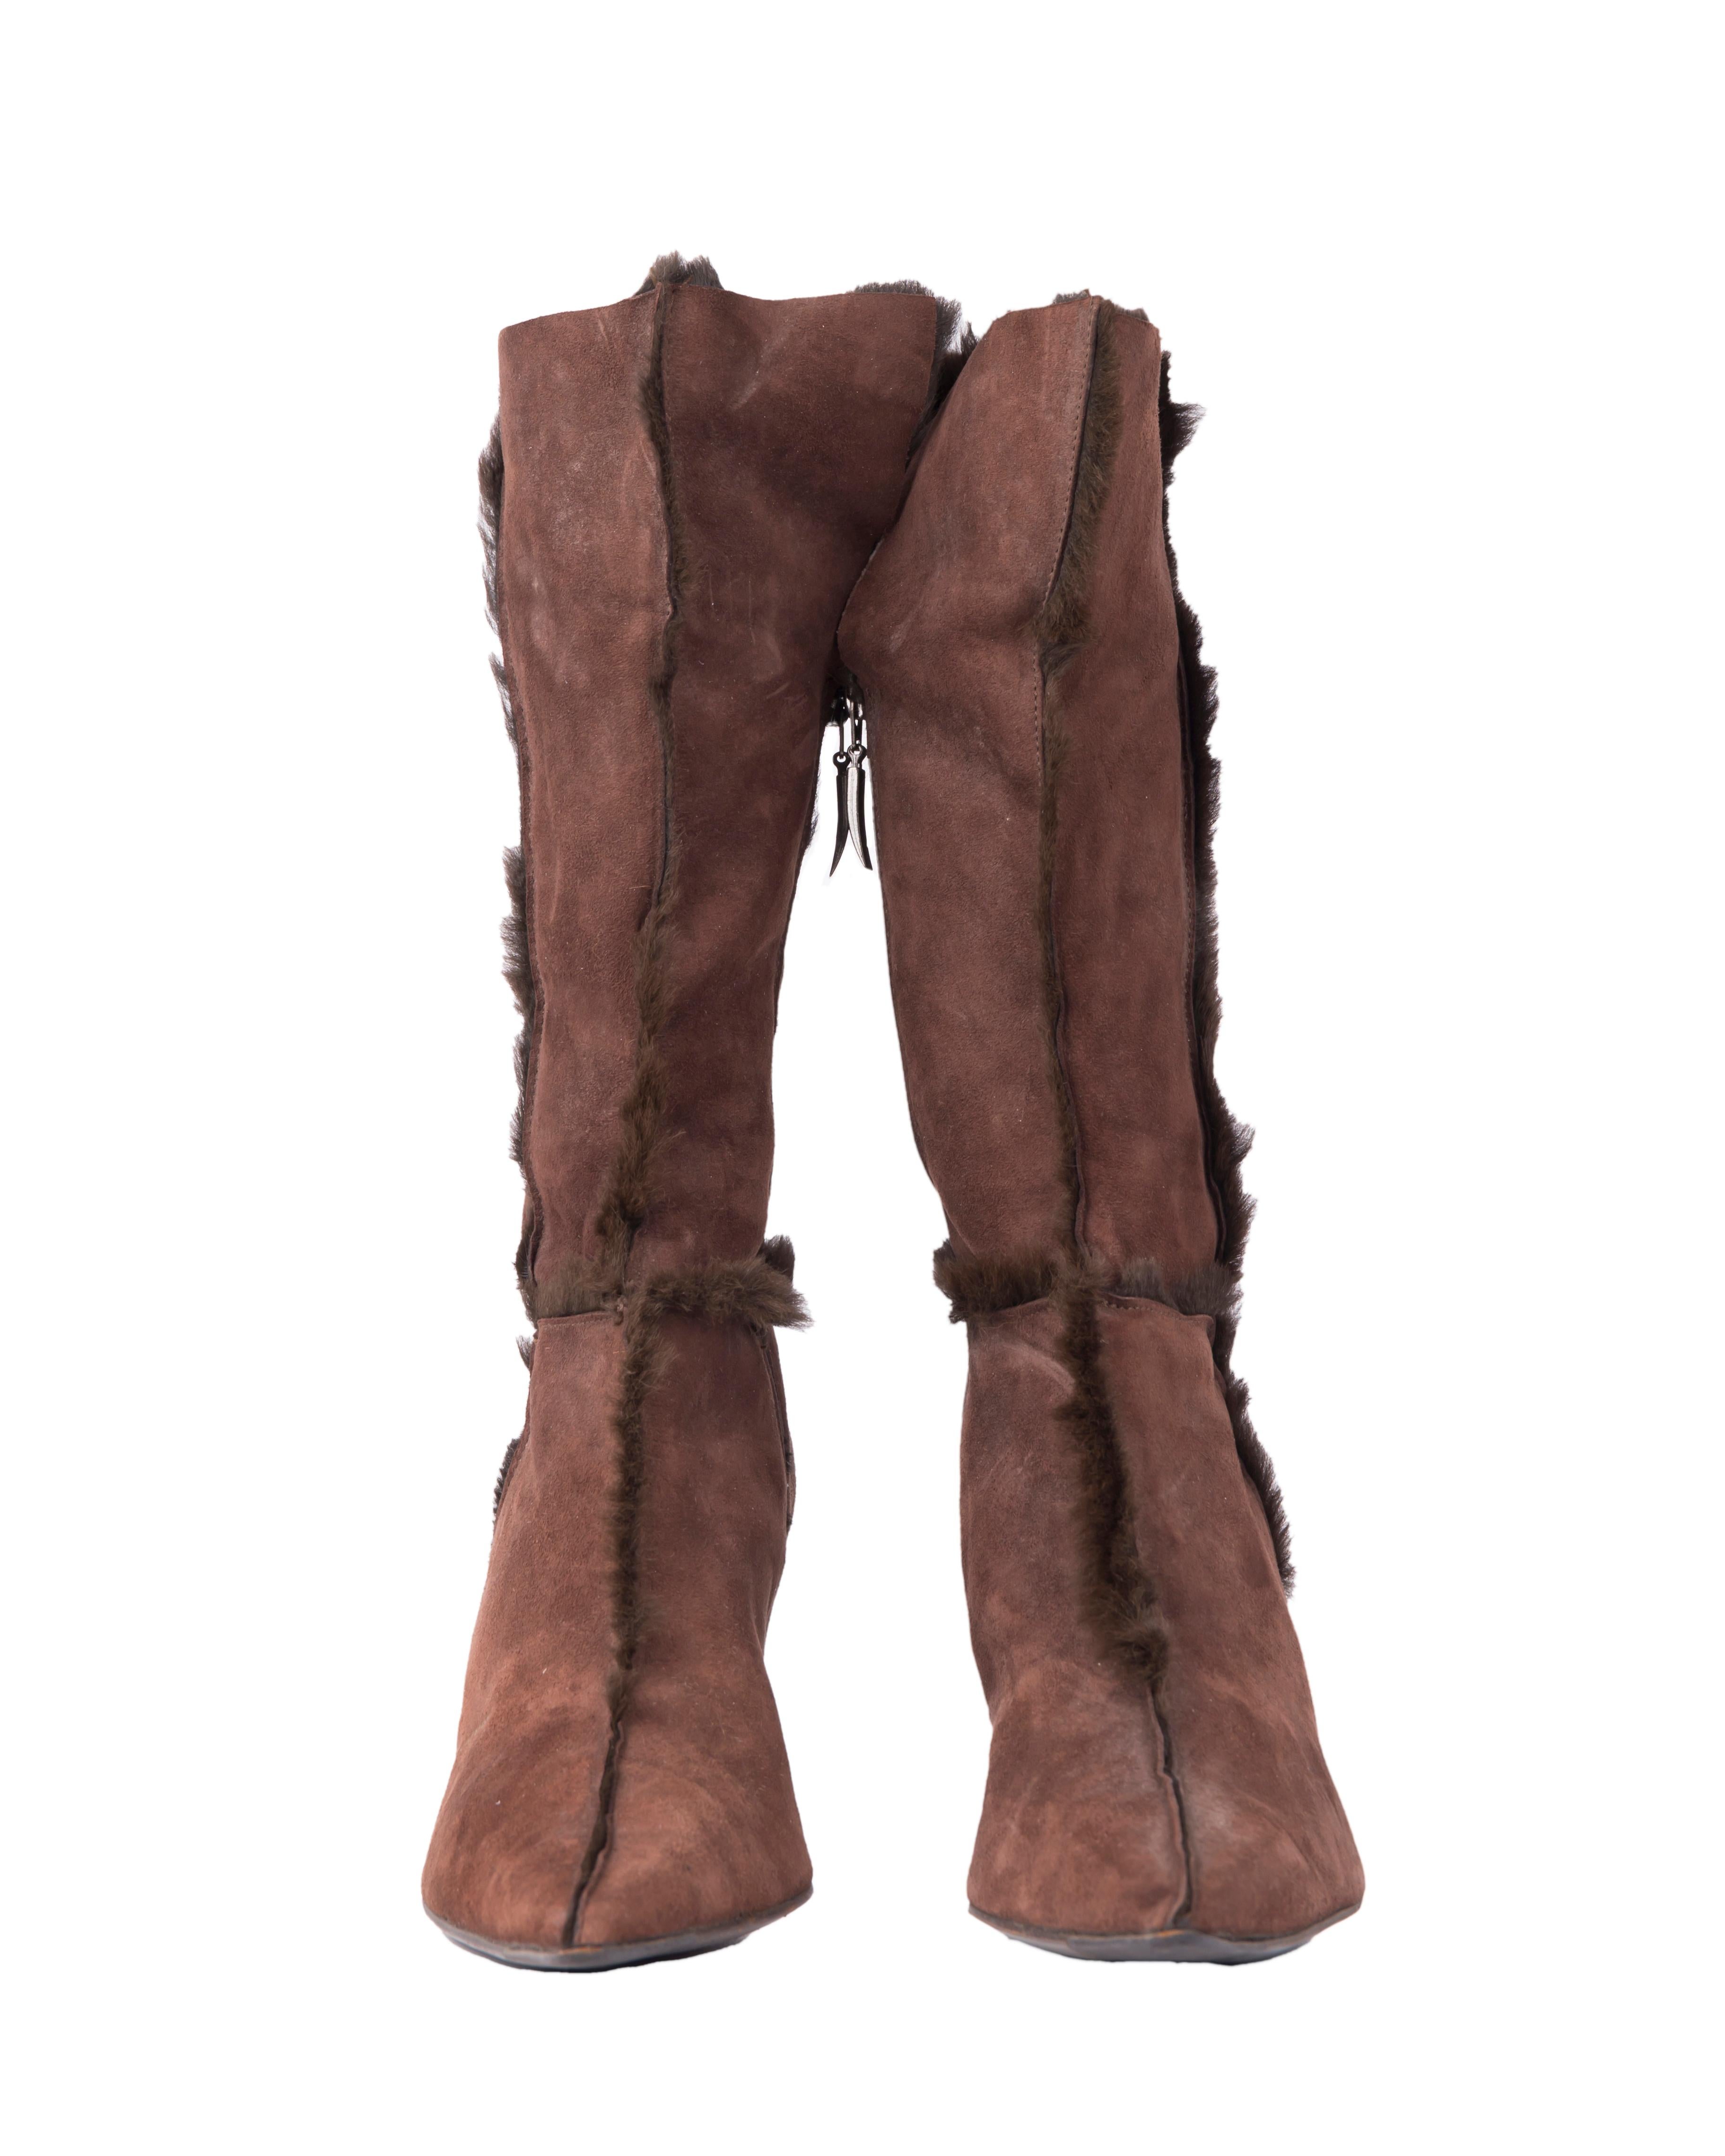 • Coffee brown suede pointed boots
• Real fur lining
• Internal zipper